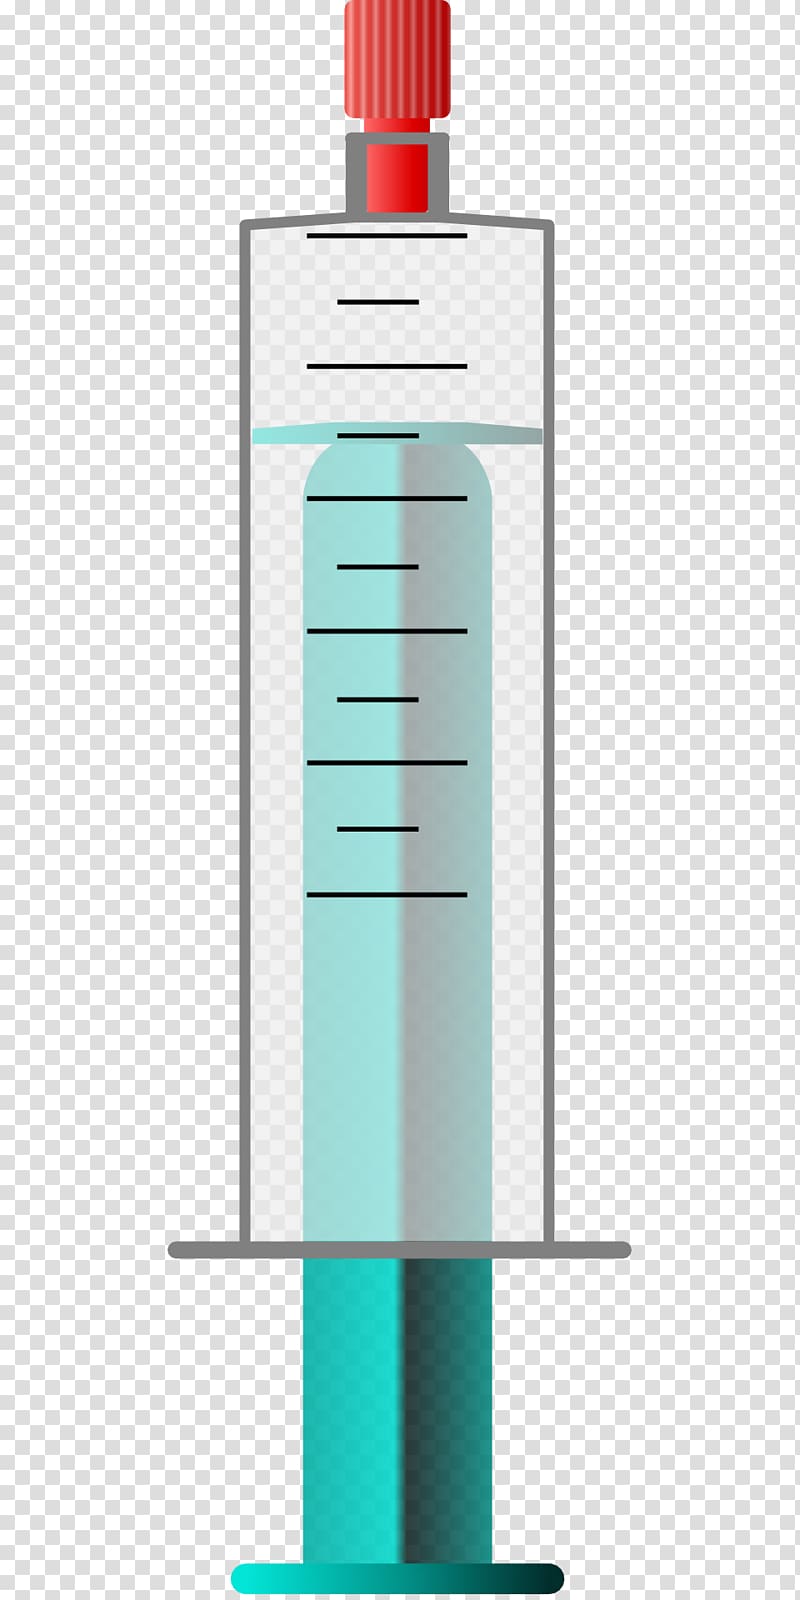 Injection Syringe Hypodermic needle Luer taper , labor transparent background PNG clipart